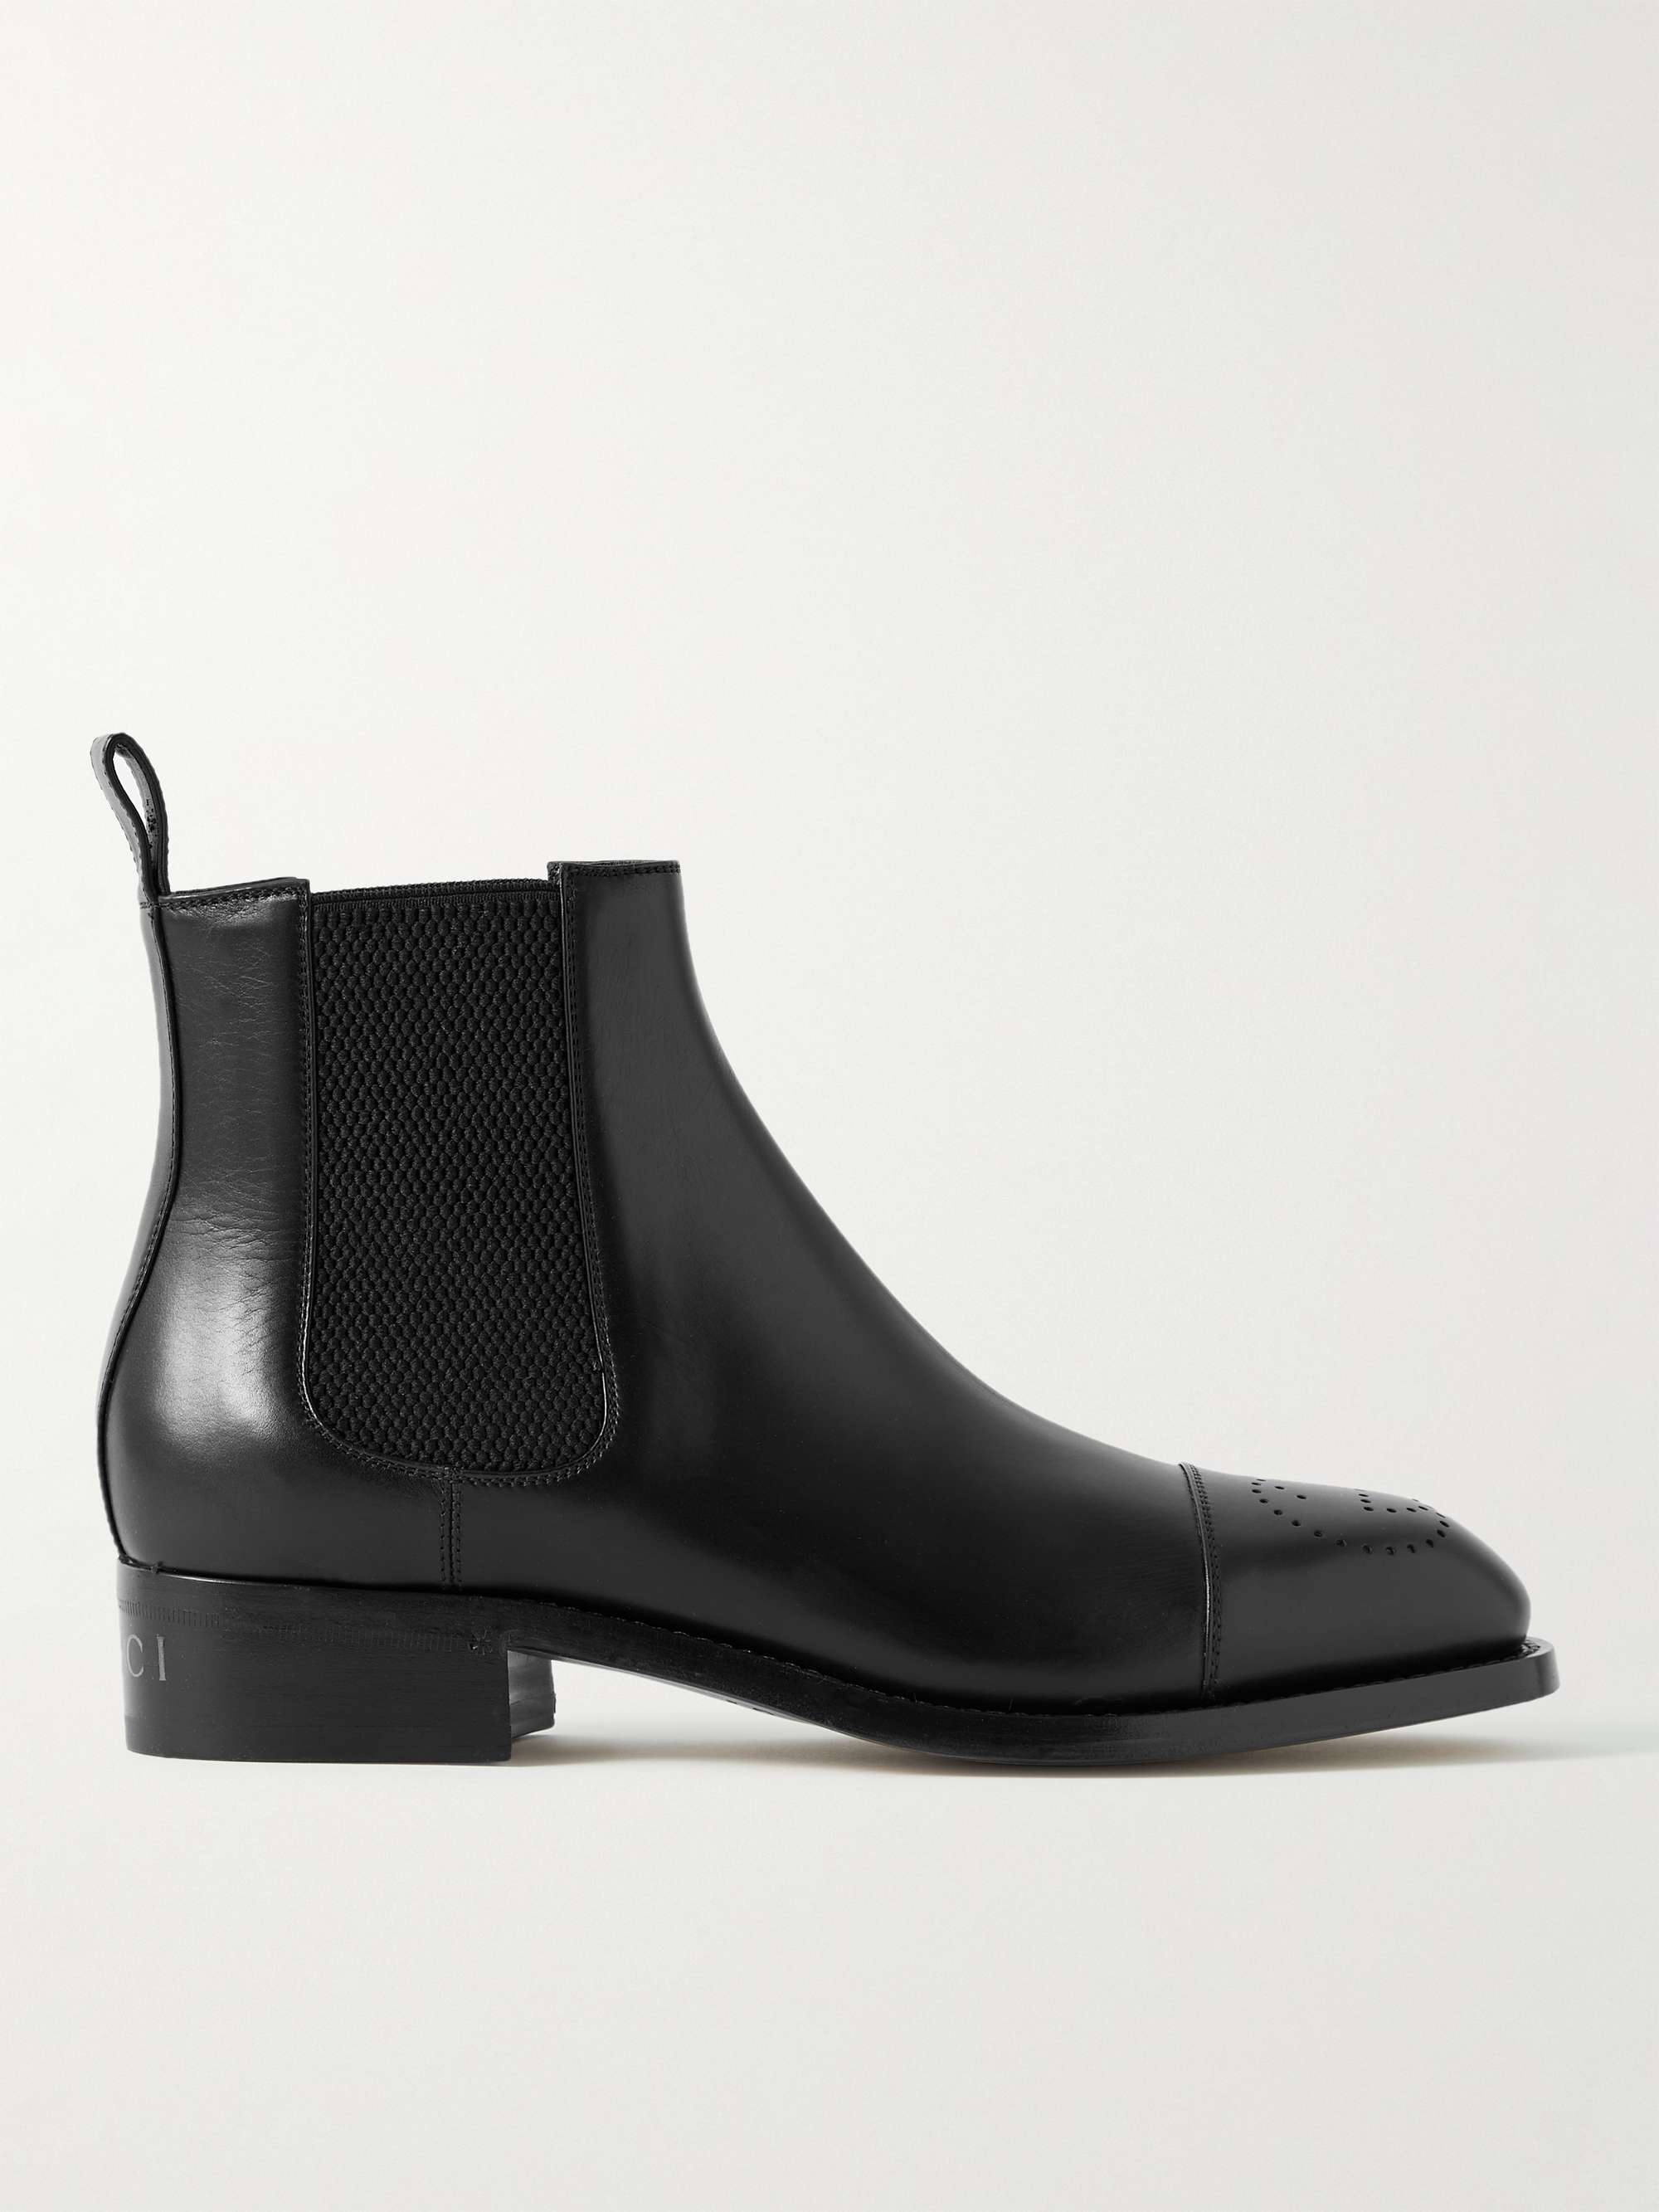 GUCCI Zowie Perforated Leather Chelsea Boots | MR PORTER